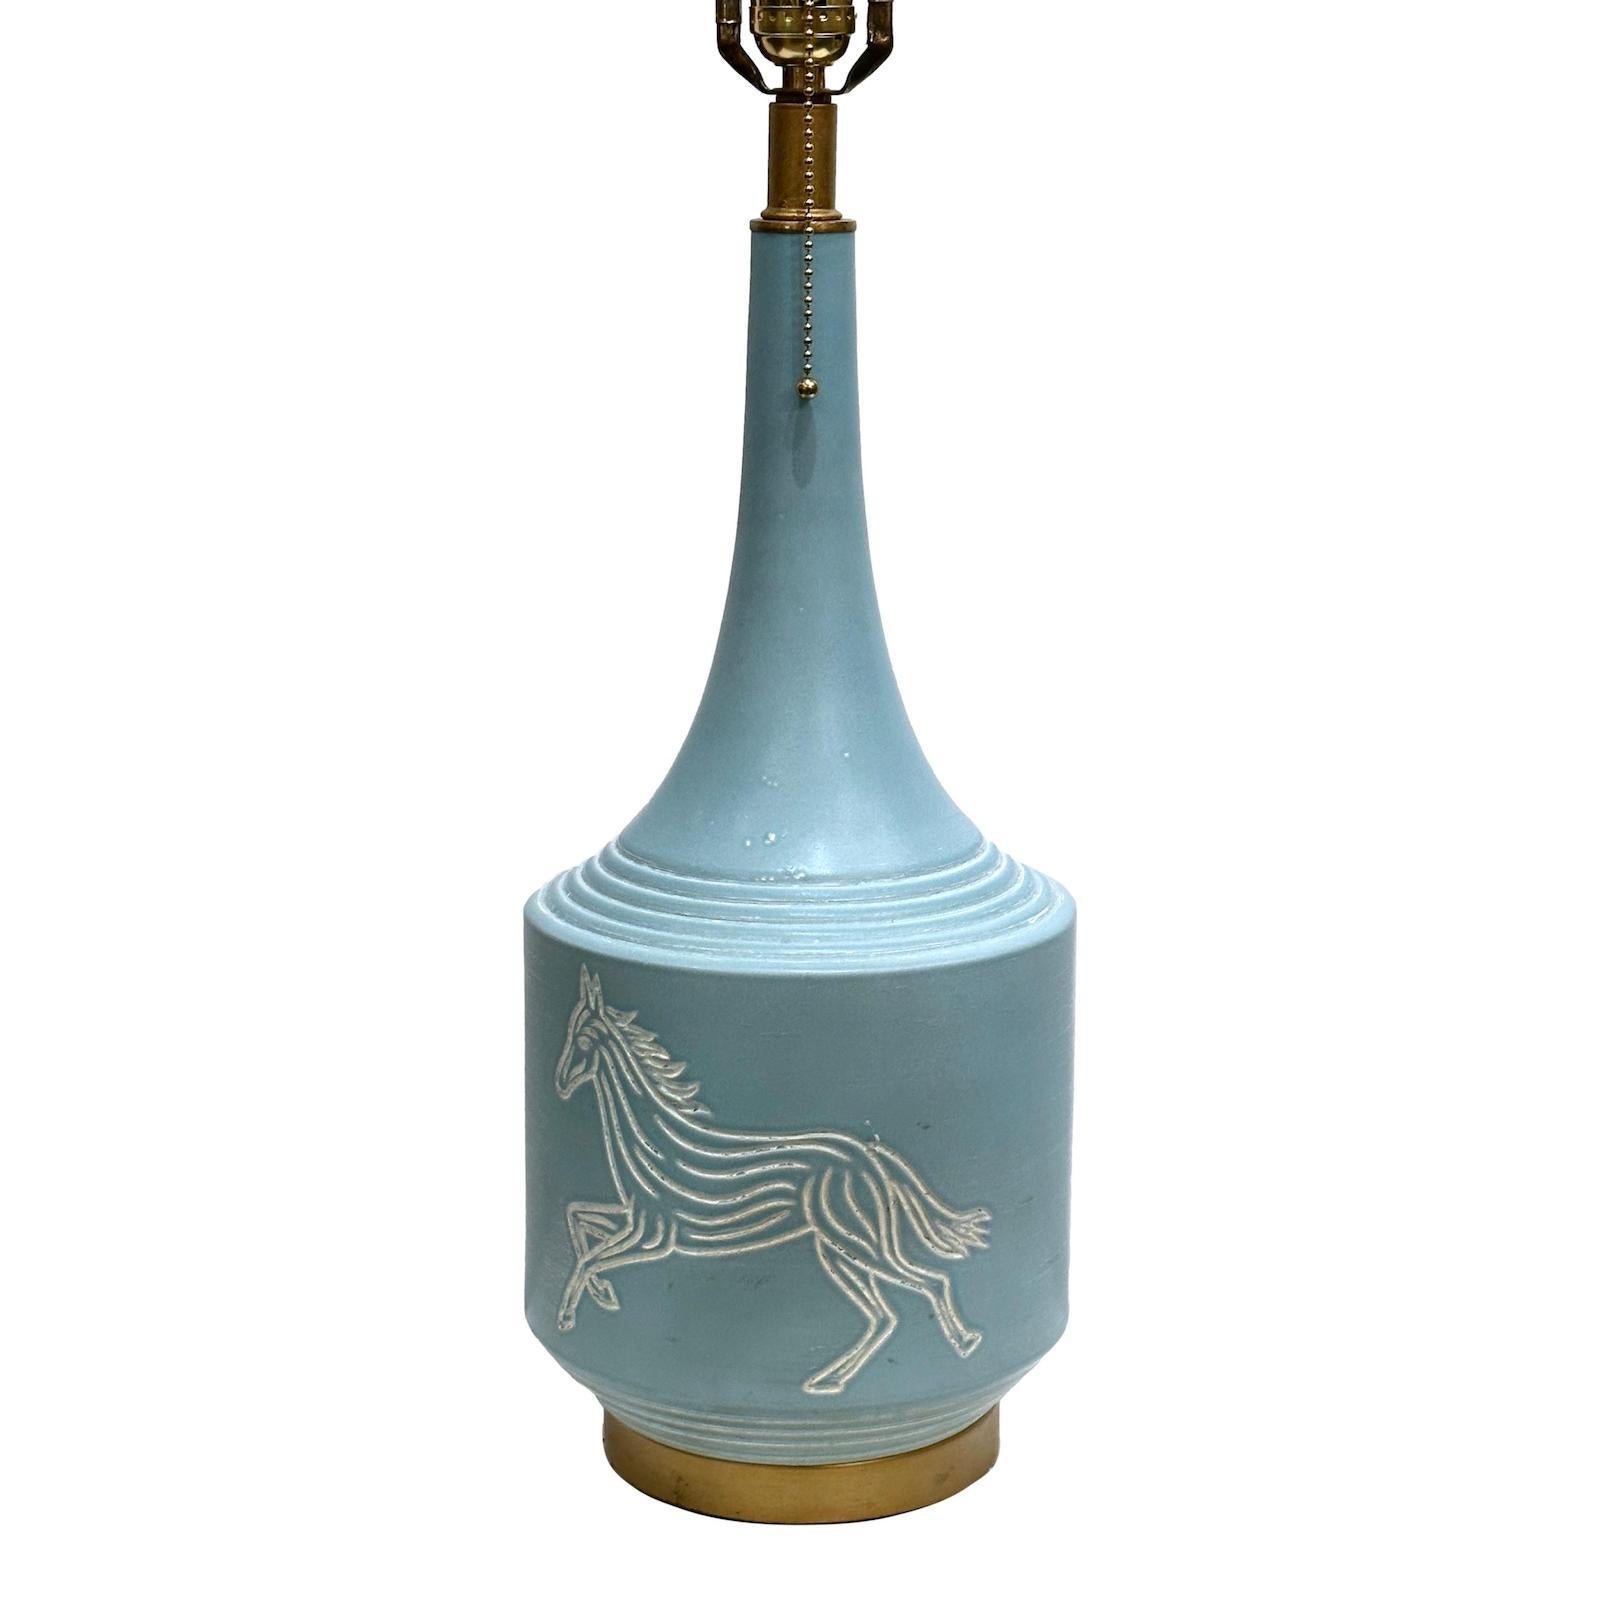 An Italian circa 1960’s single porcelain table lamp with horse motif on both sides.

Measurements:
Height of body: 19
Height to shade rest: 28
Diameter: 7.5.